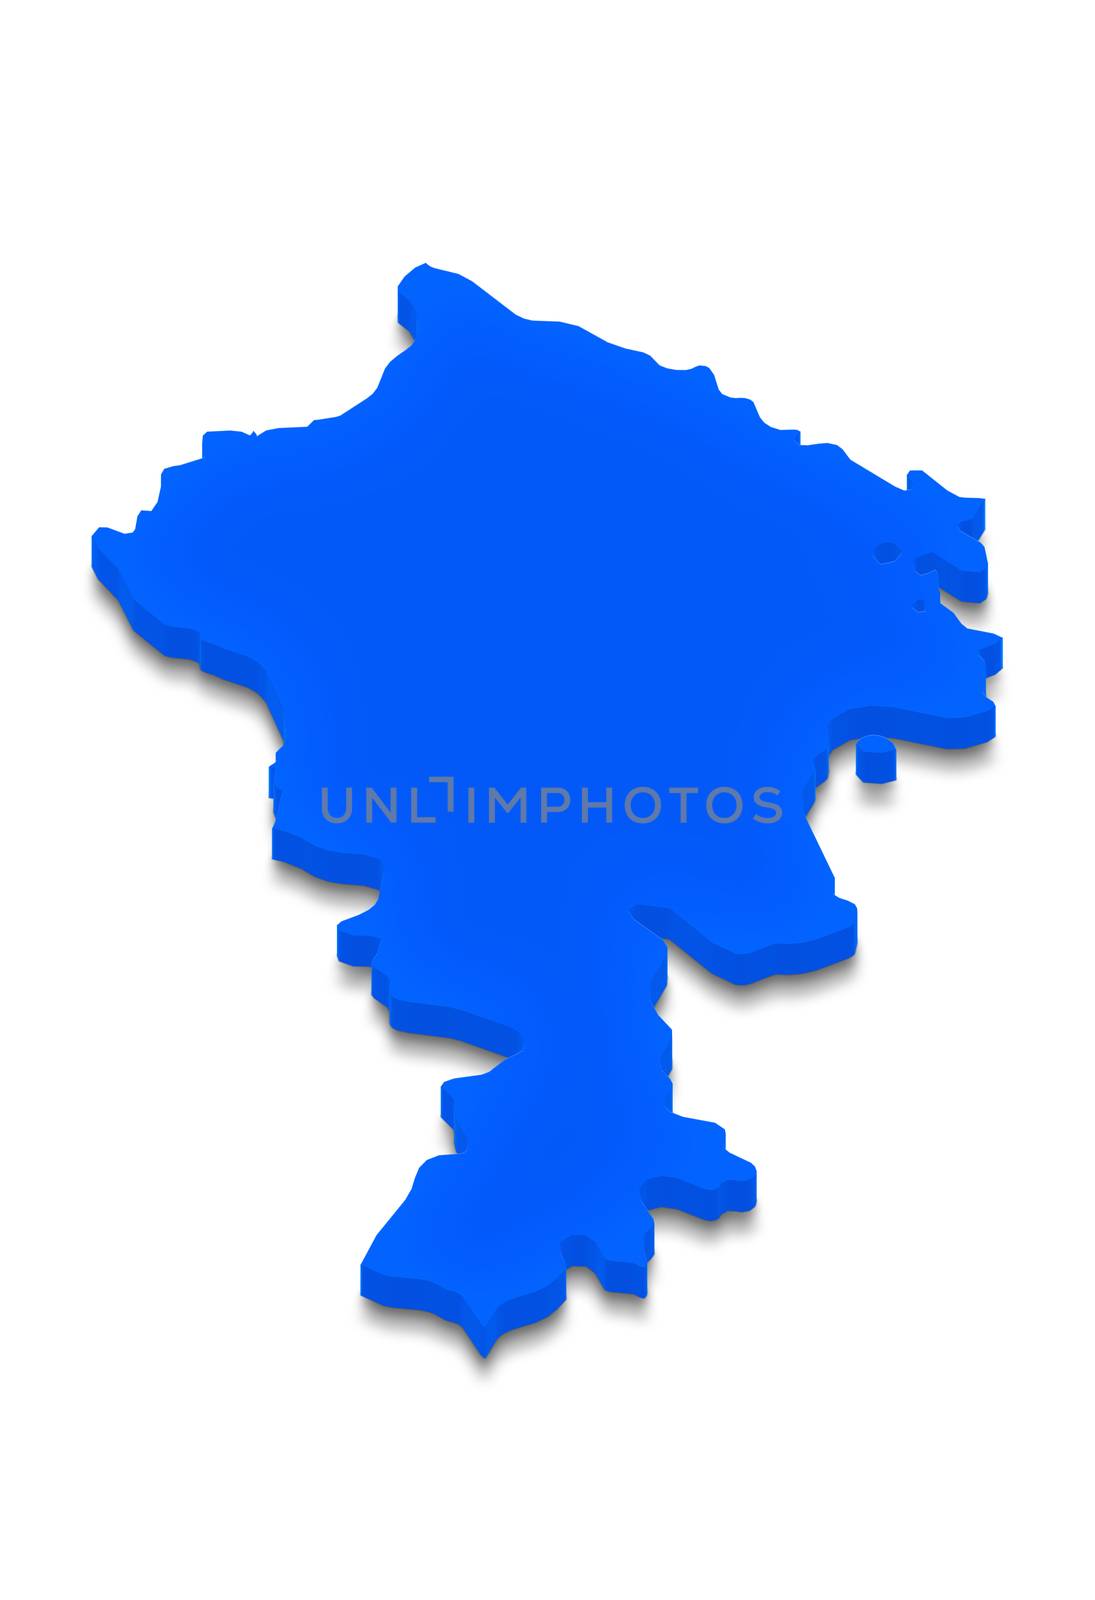 Illustration of a blue ground map of Armenia on white isolated background. Left 3D isometric perspective projection.